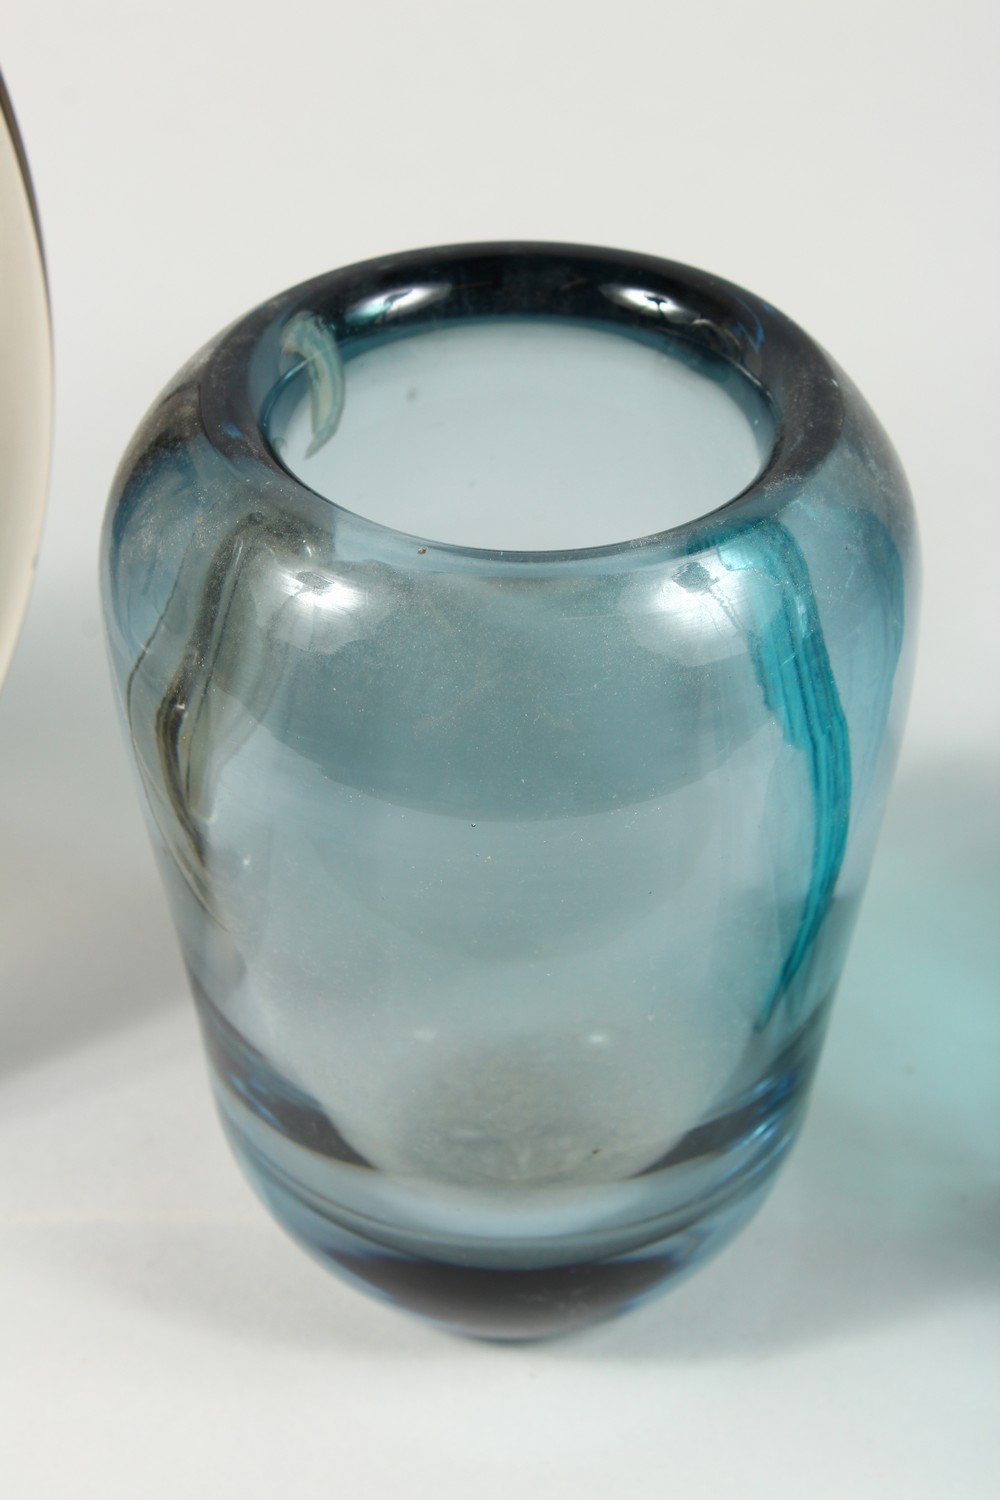 GEOFFREY BAXTER FOR WHITEFRIARS, a moulded turquoise glass vase, and two other items of - Image 3 of 5